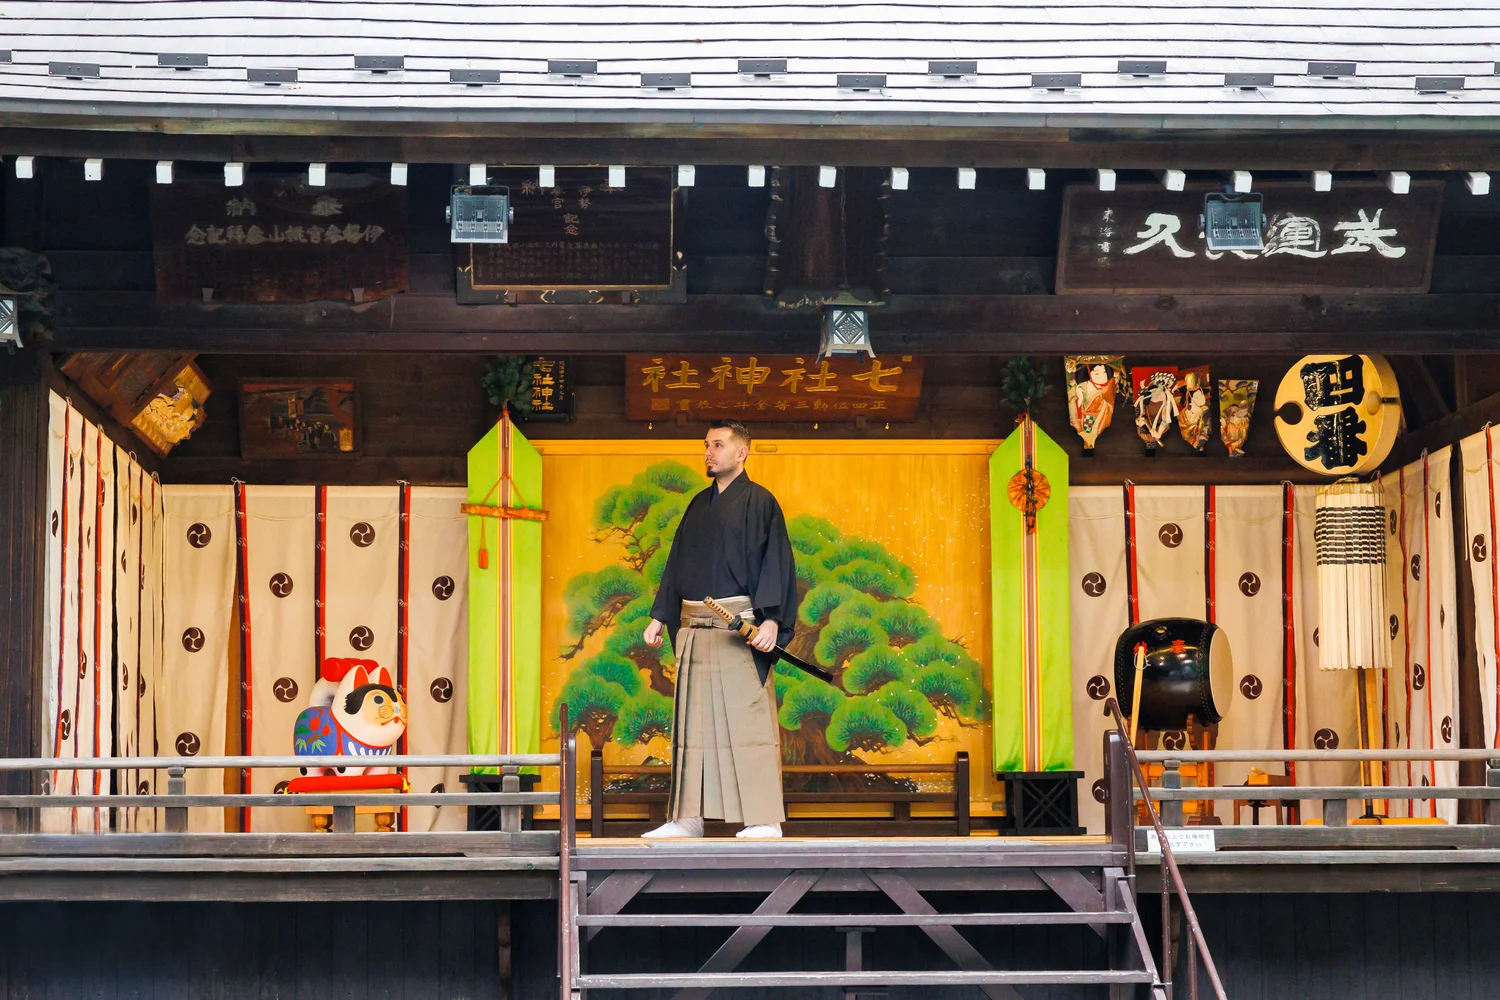 You've never been to a shrine, right? For most tourists, going inside is a rare experience. Hearing Japanese musical instruments performed right in front of you is quite valuable! Whether you want to wear a kimono or feel like a samurai, please give this experience a try.